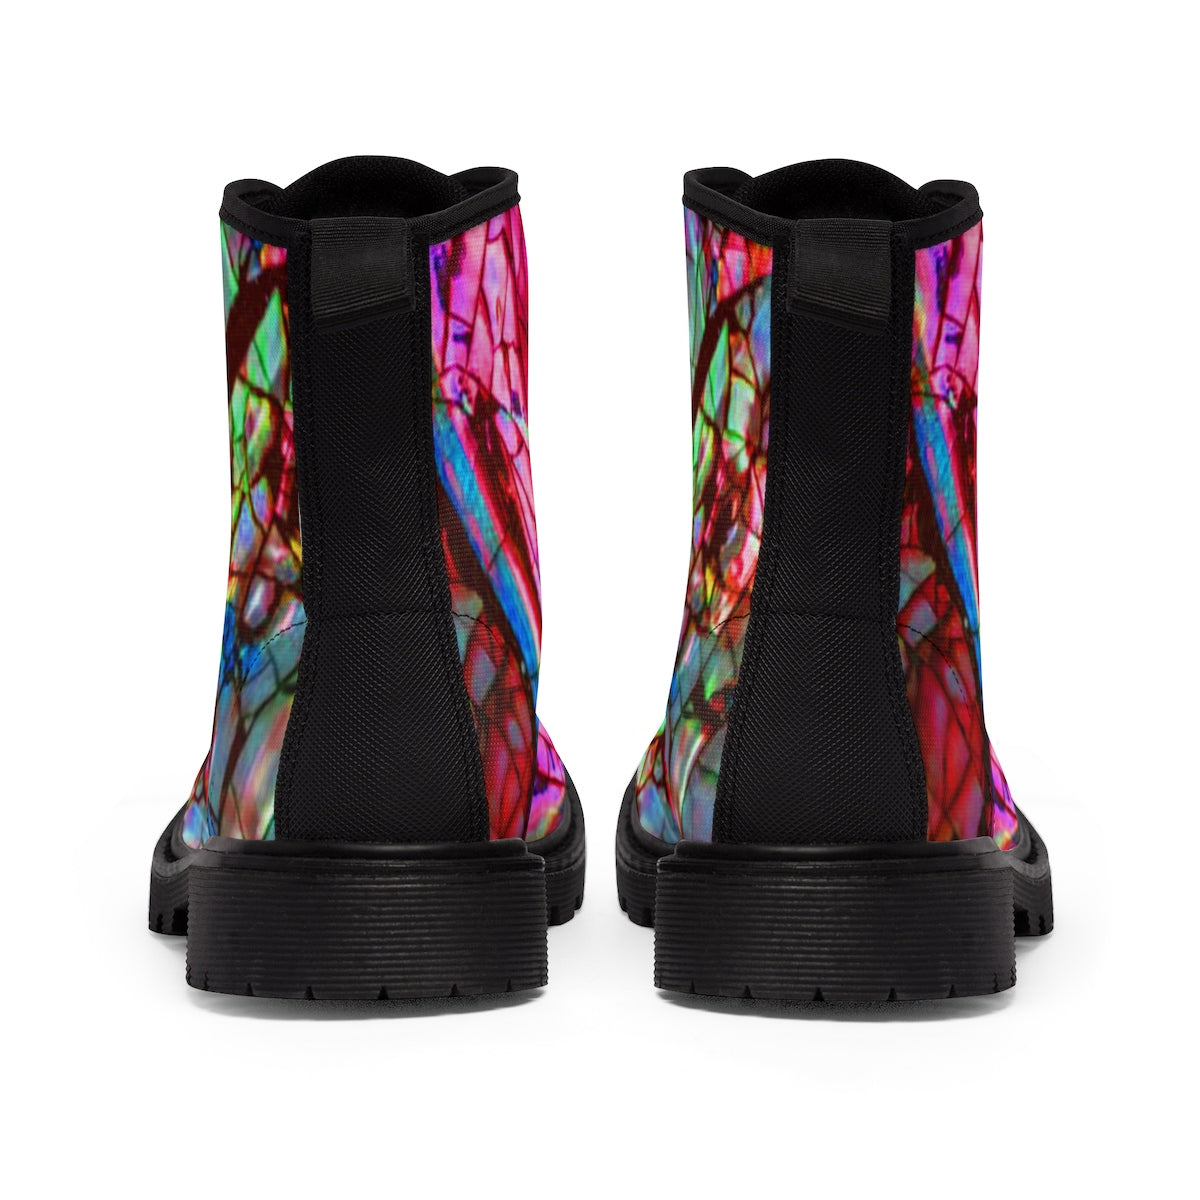 Stain Glass Men's Vluxe Canvas Boots